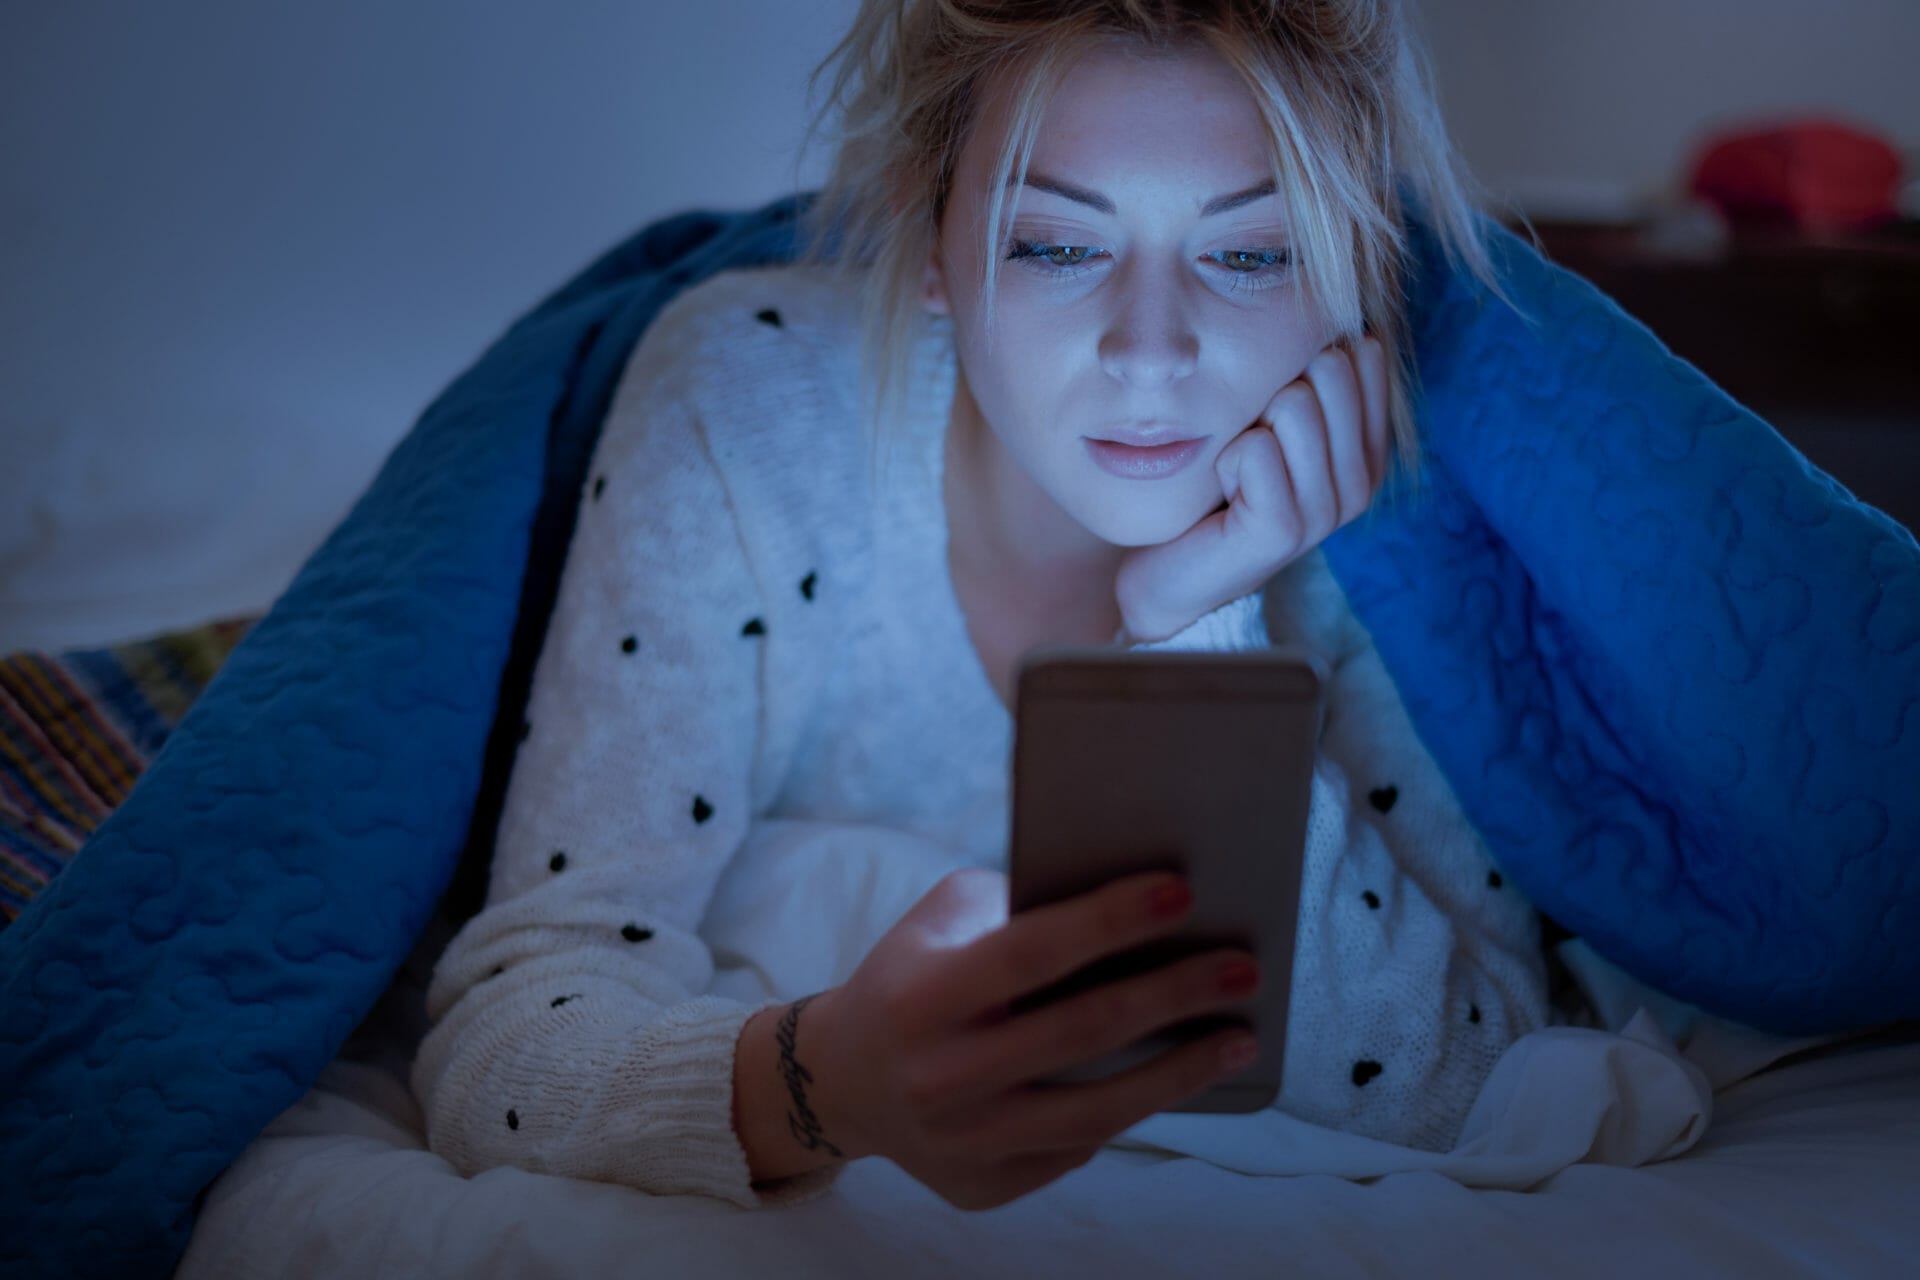 Reduce your exposure to blue light before bedtime